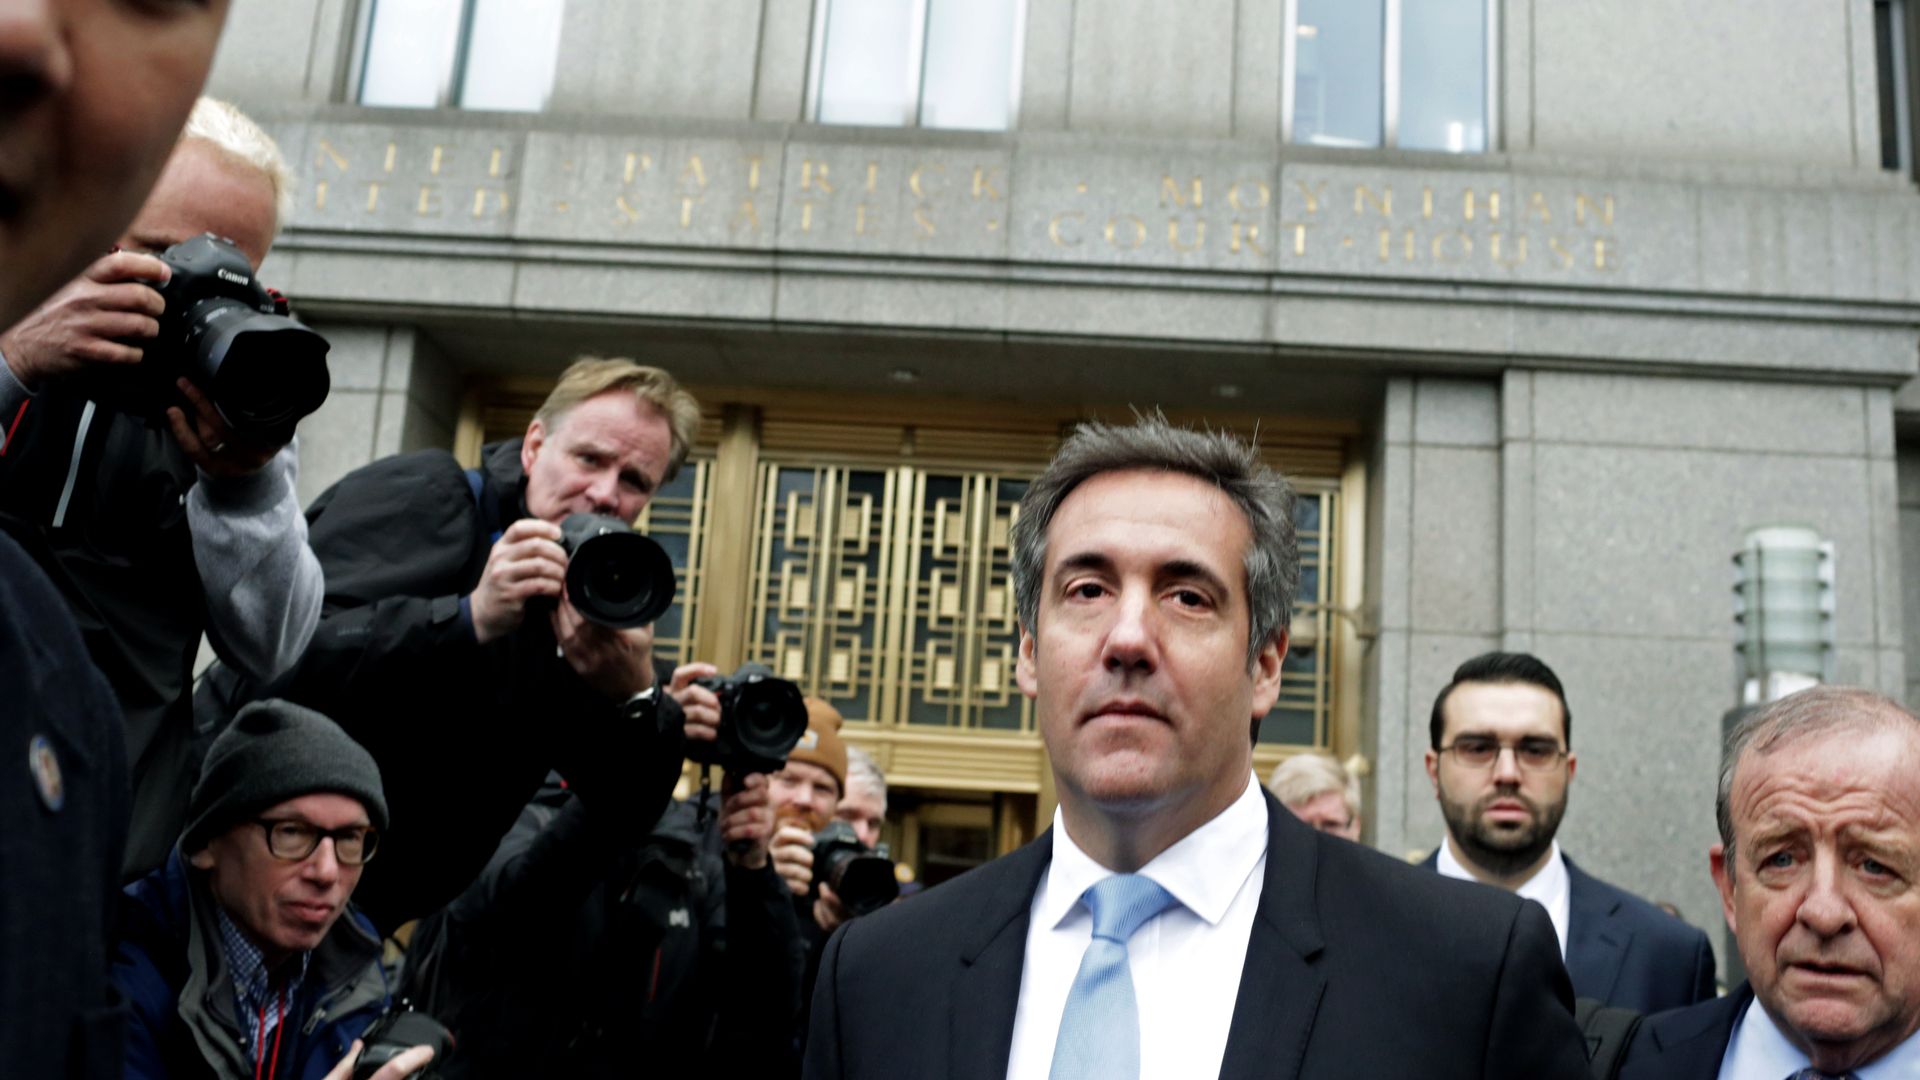 Michael Cohen, President Trump's personal attorney, leaves court.